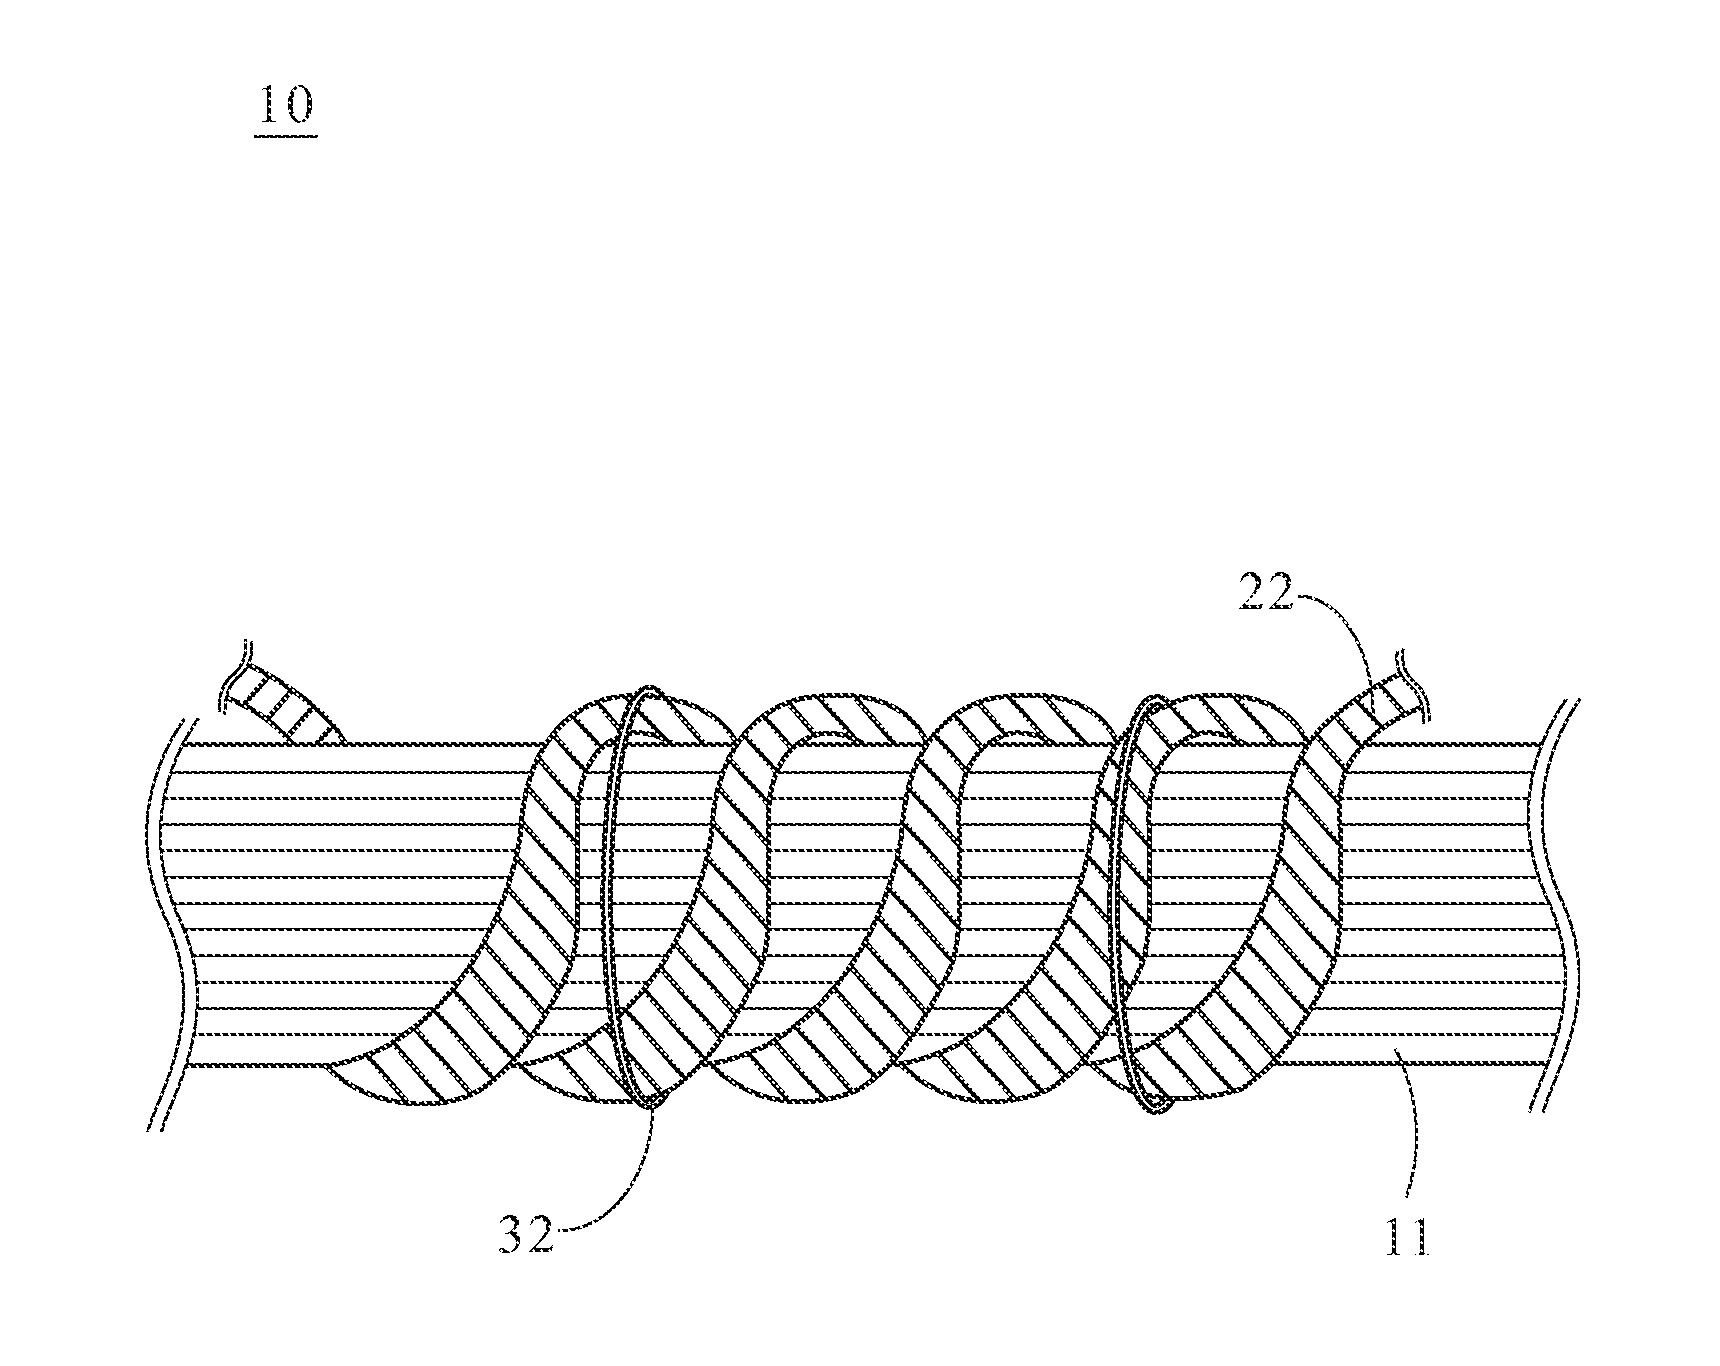 Woven electrical connection structure